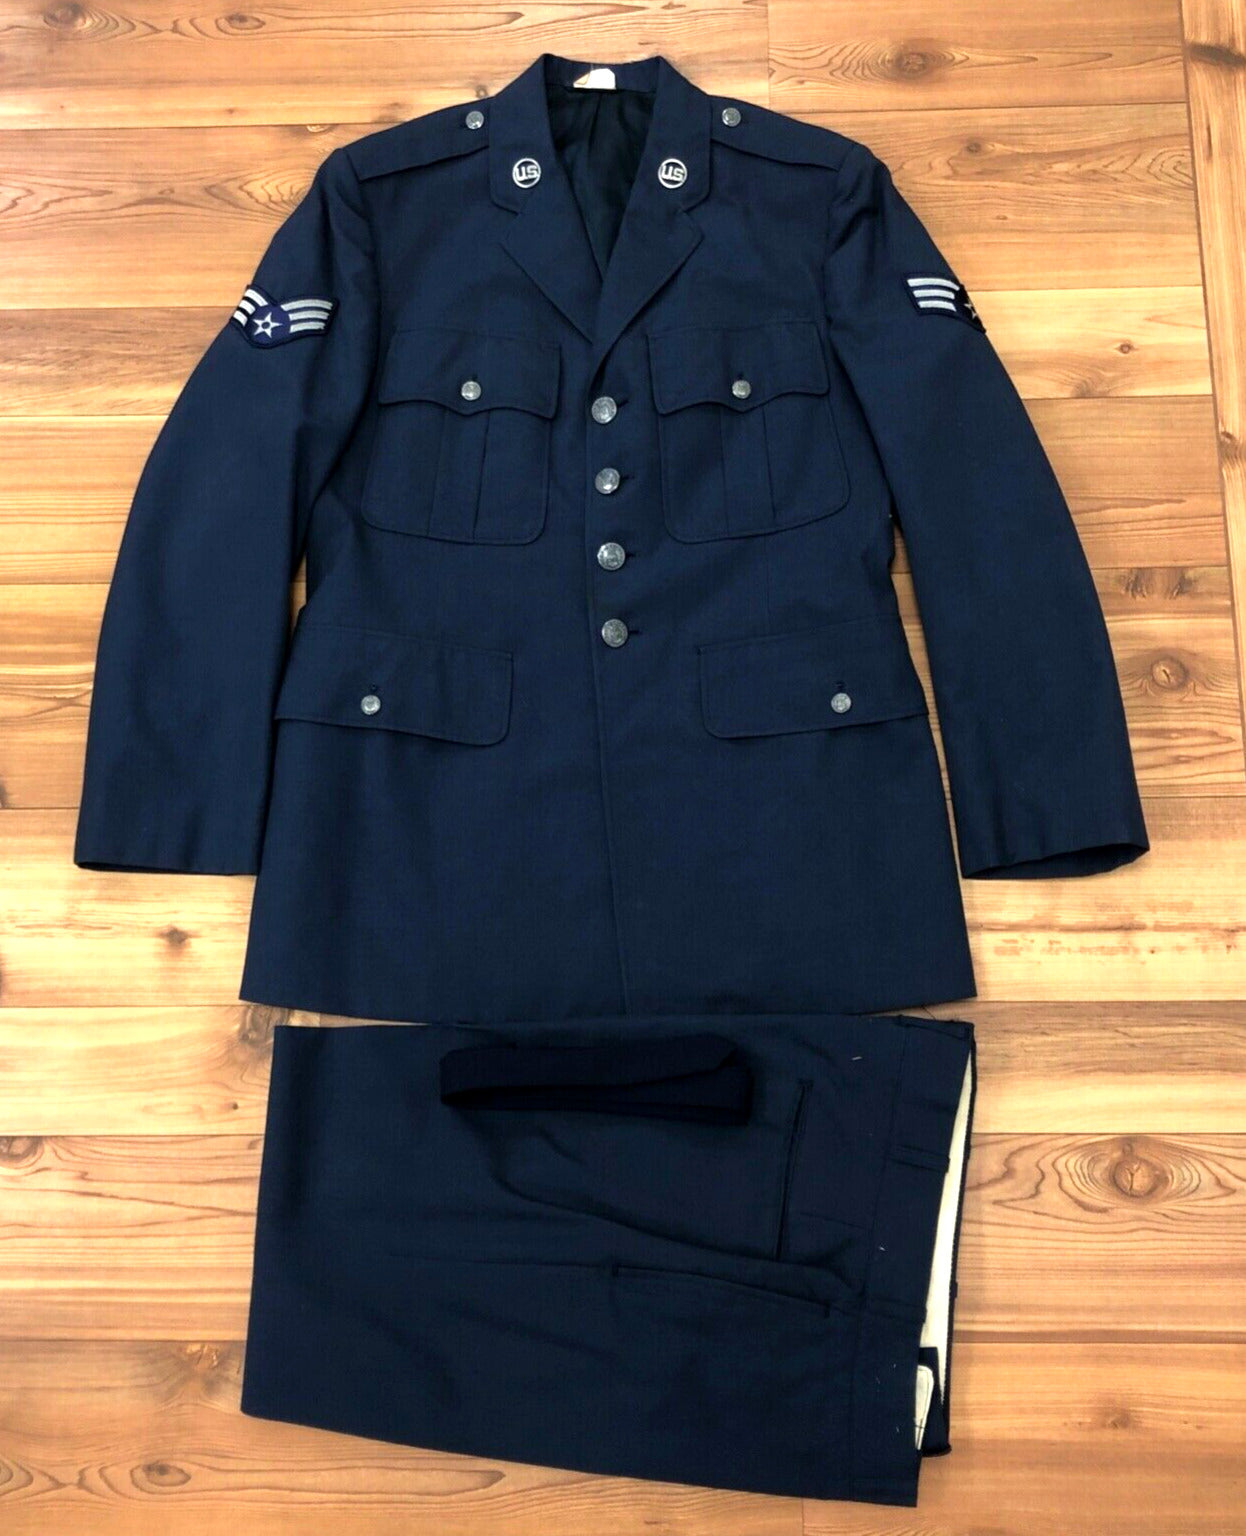 SET Tennessee Overall Blue U.S. Air Force Uniform Set Adult Size 42R/33R